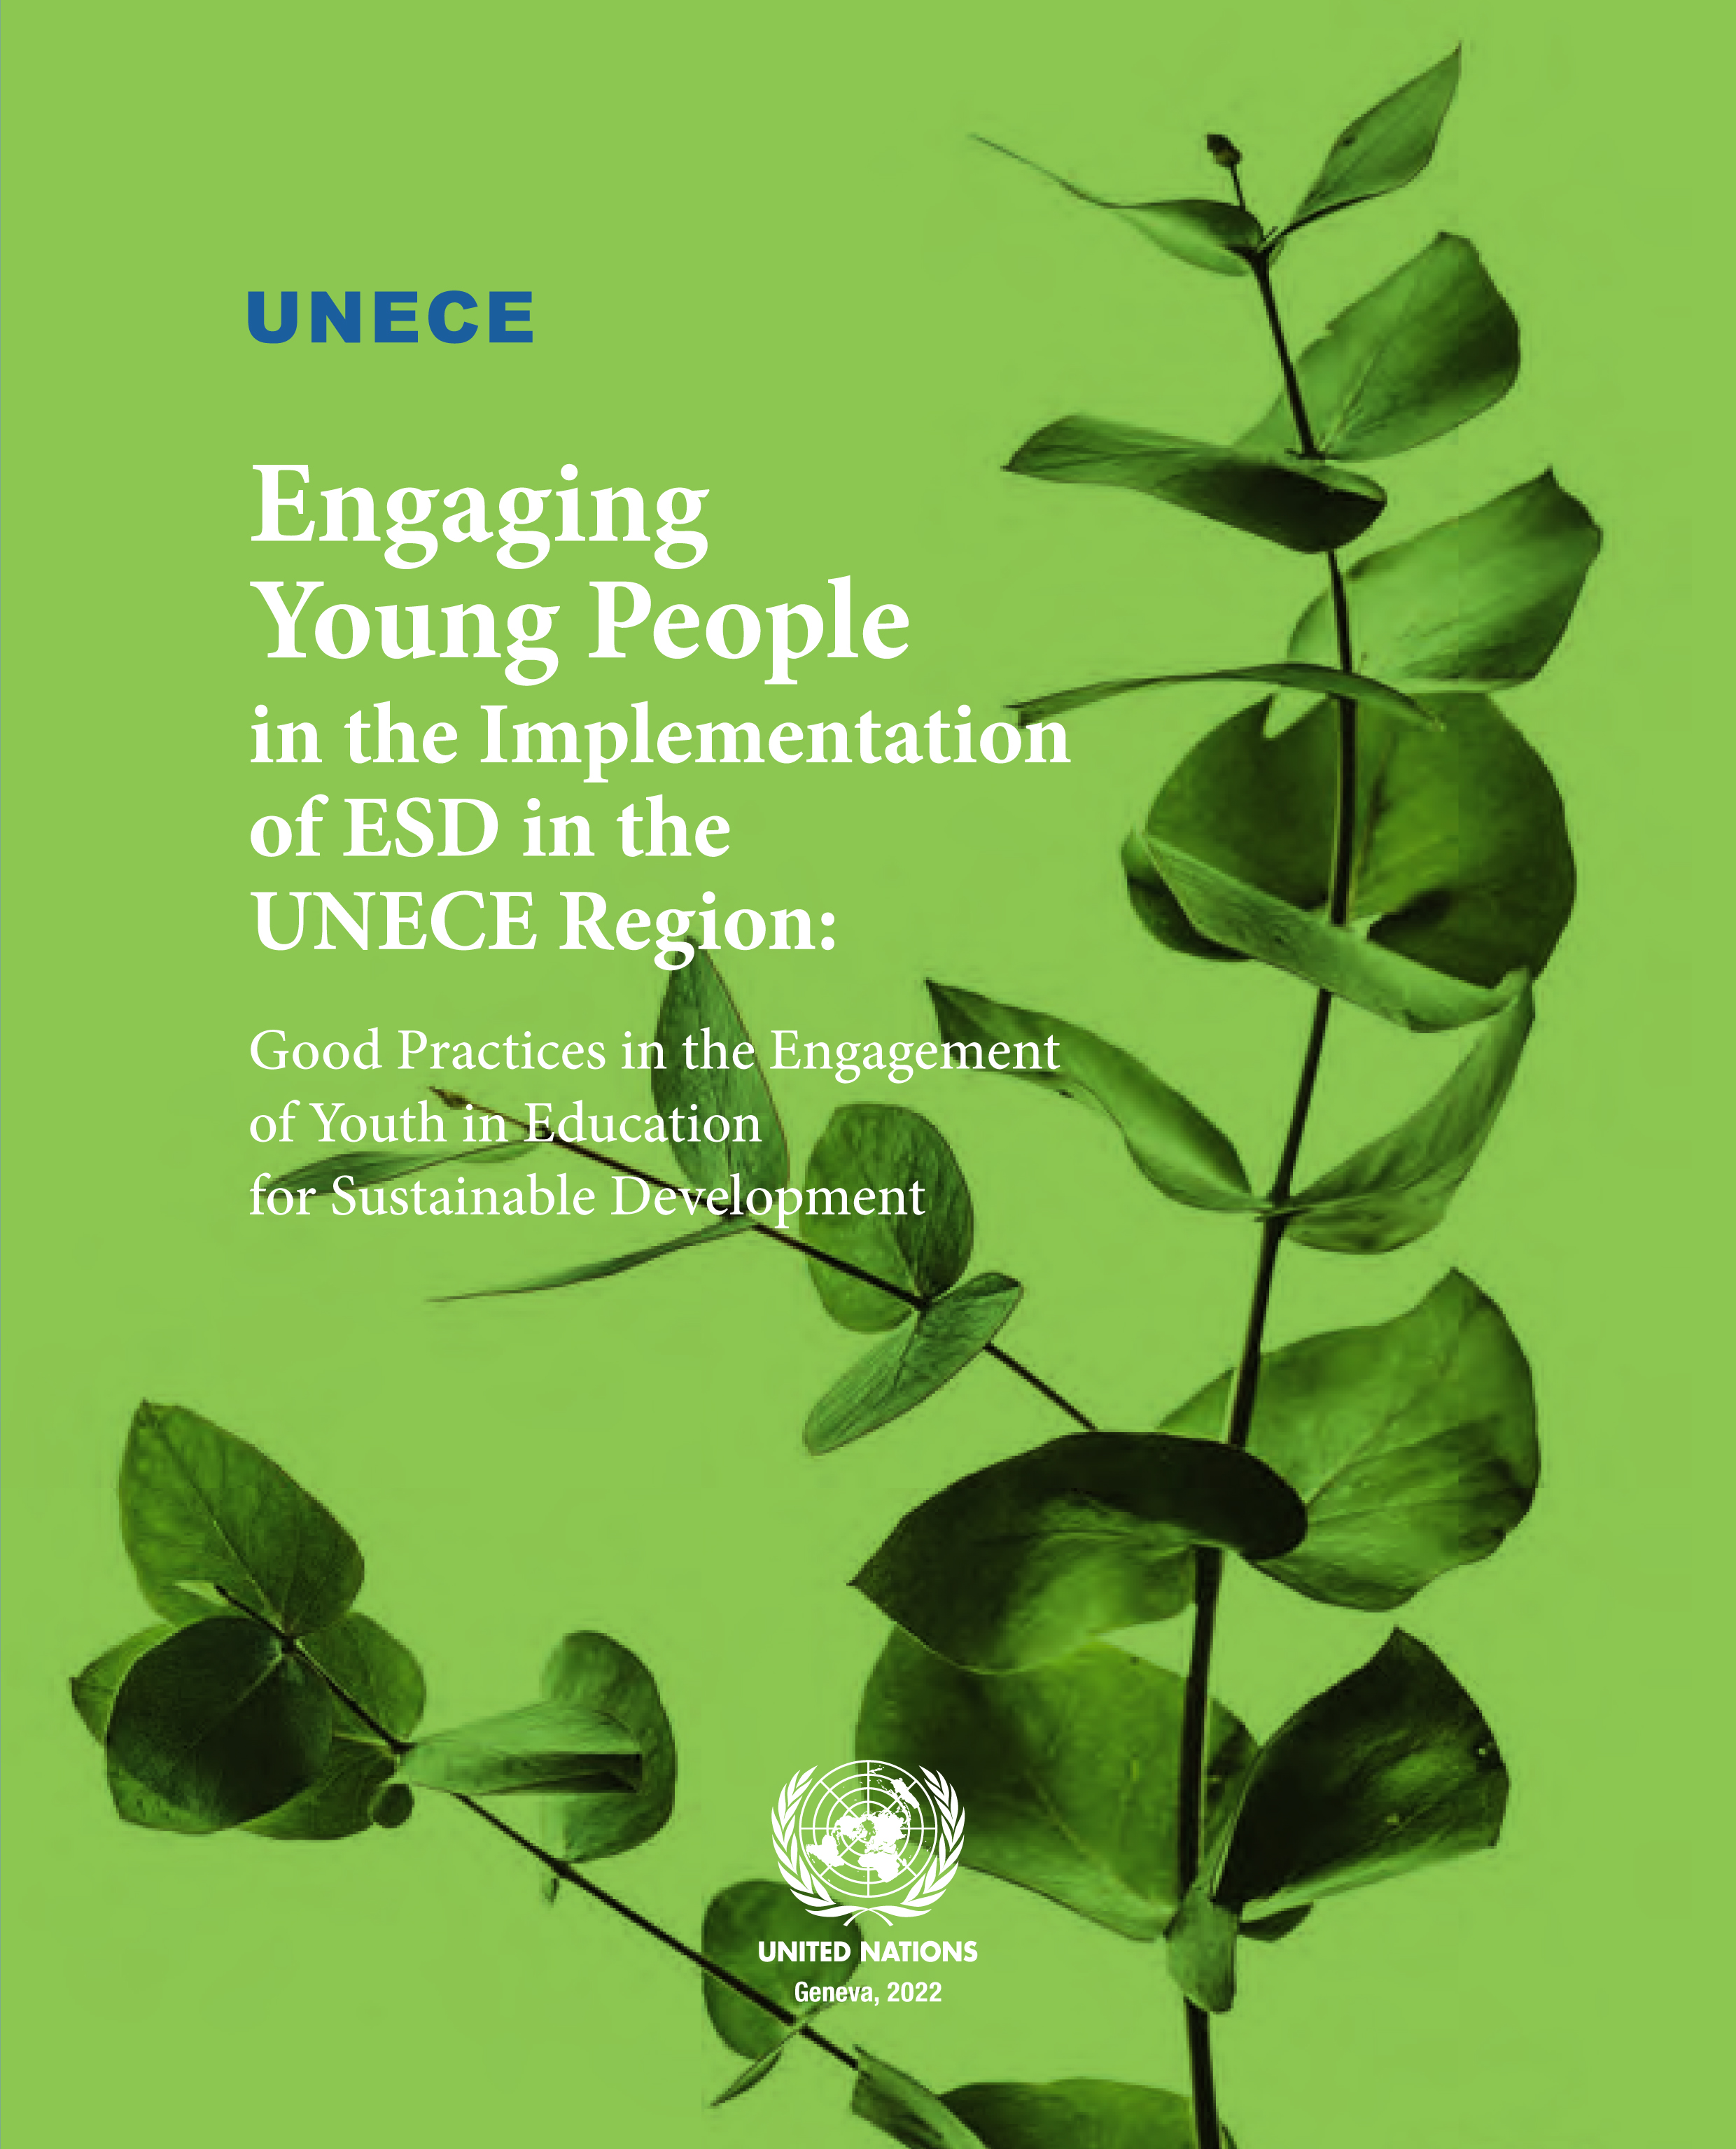 image of Engaging Young People in the Implementation of ESD in the UNECE Region